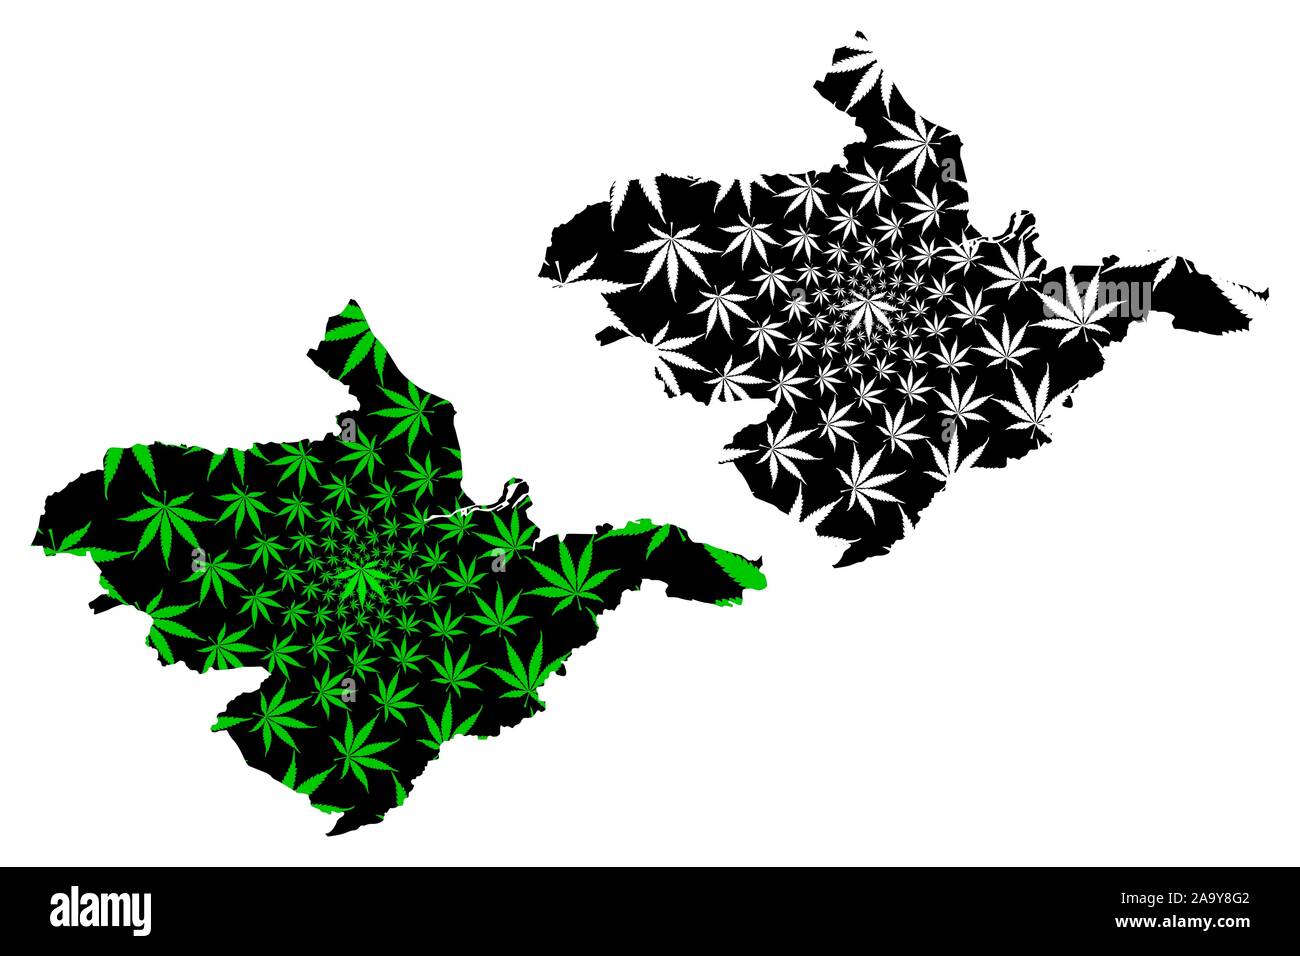 Falkirk Council (United Kingdom, Scotland, Local government in Scotland) map is designed cannabis leaf green and black, Falkirk map made of marijuana Stock Vector